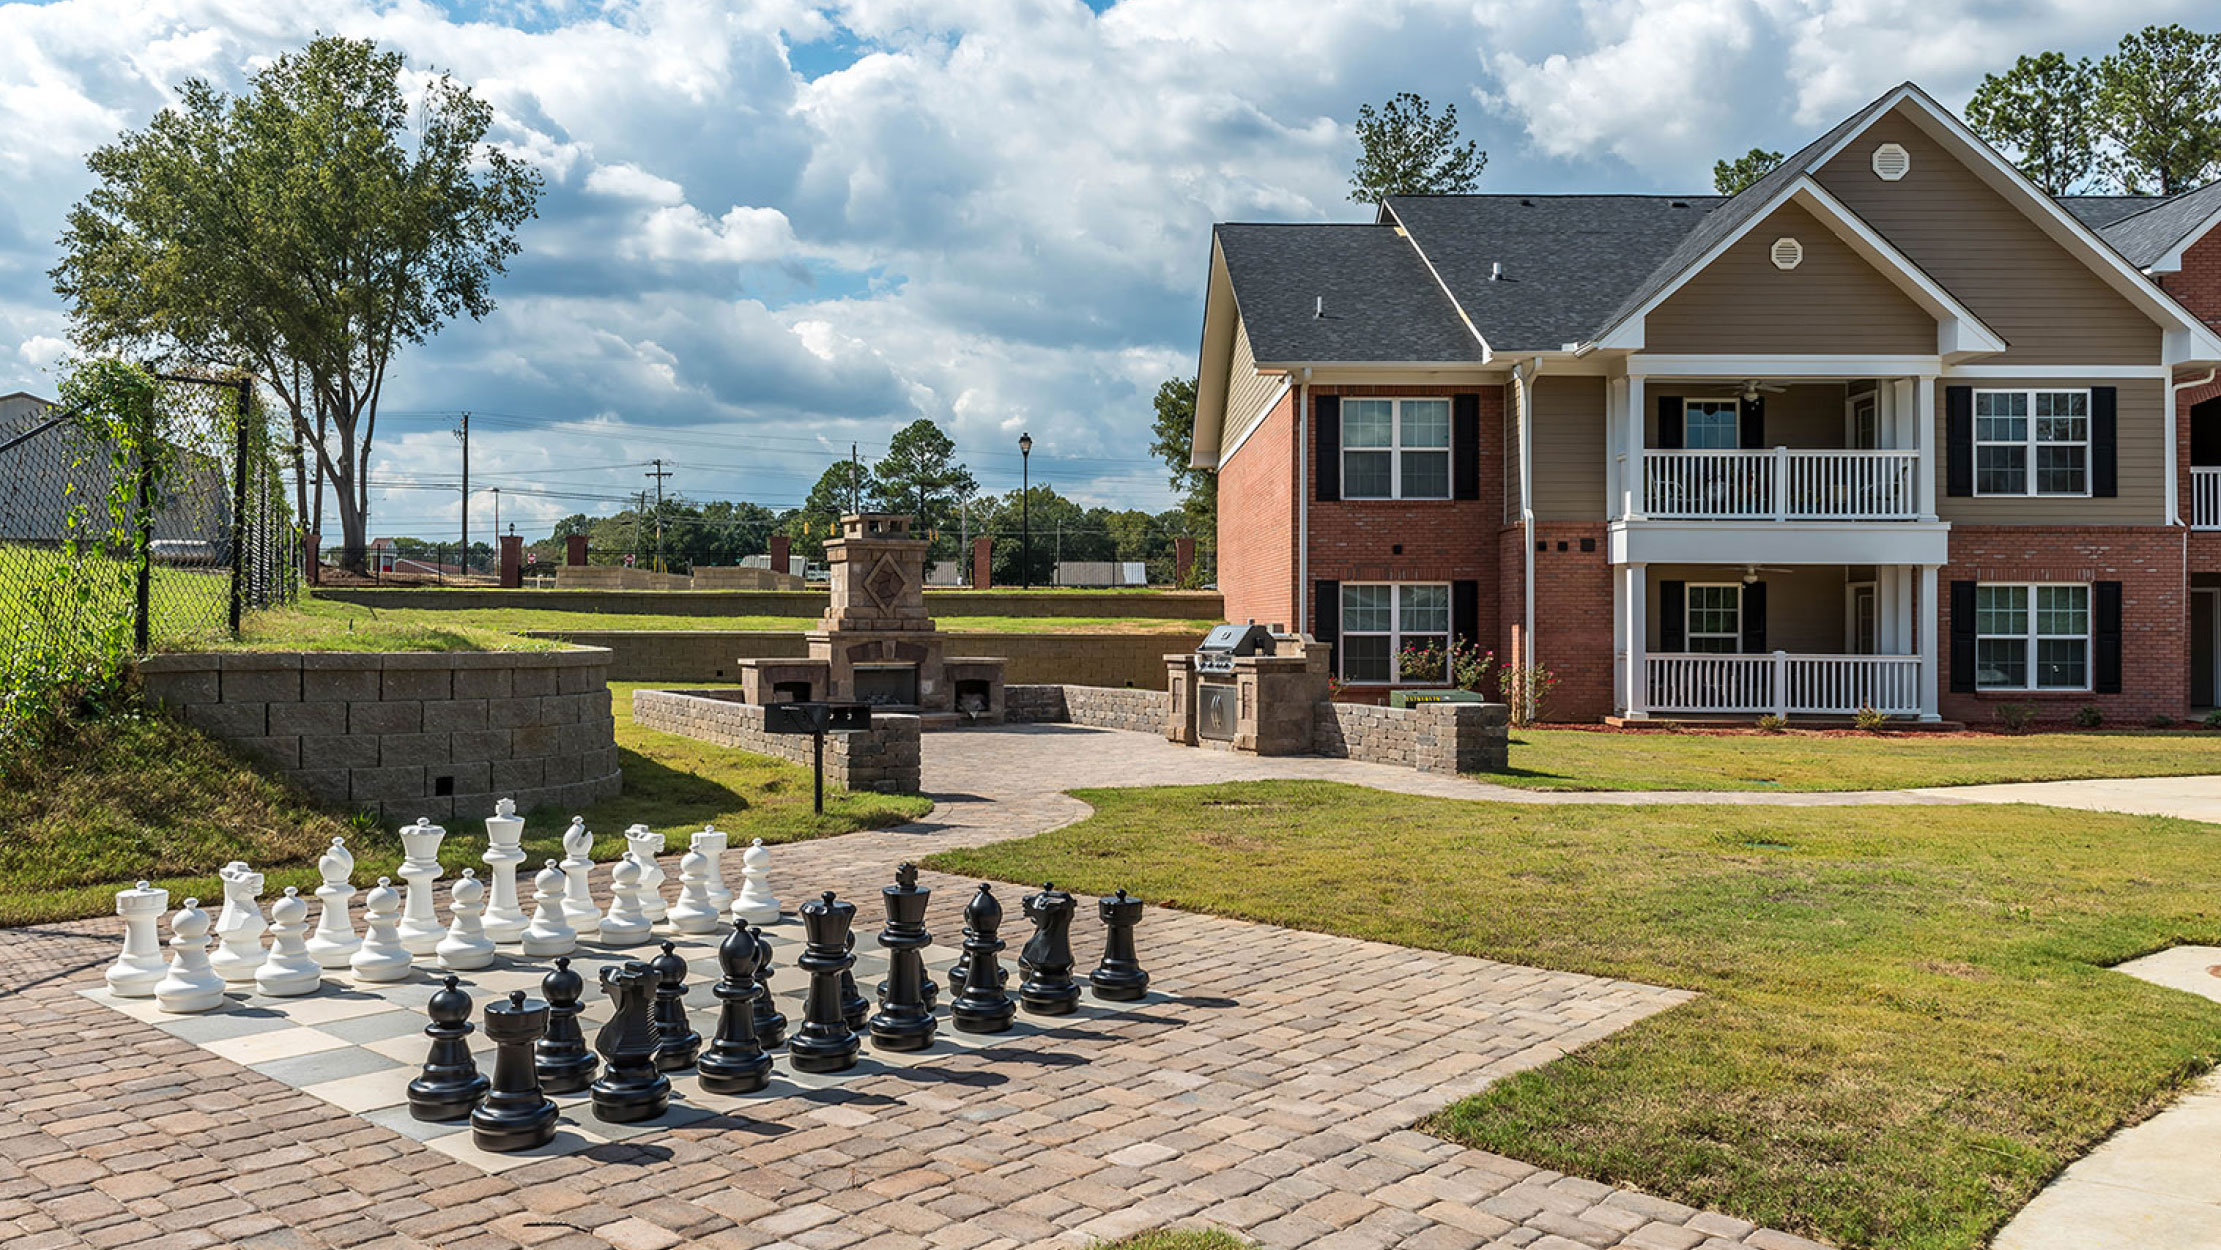 Potemkin Senior Village I & II, a Fairway Management senior community located in Warner Robins, Georgia, recently added new amenities upon completing the construction of the community’s second phase.